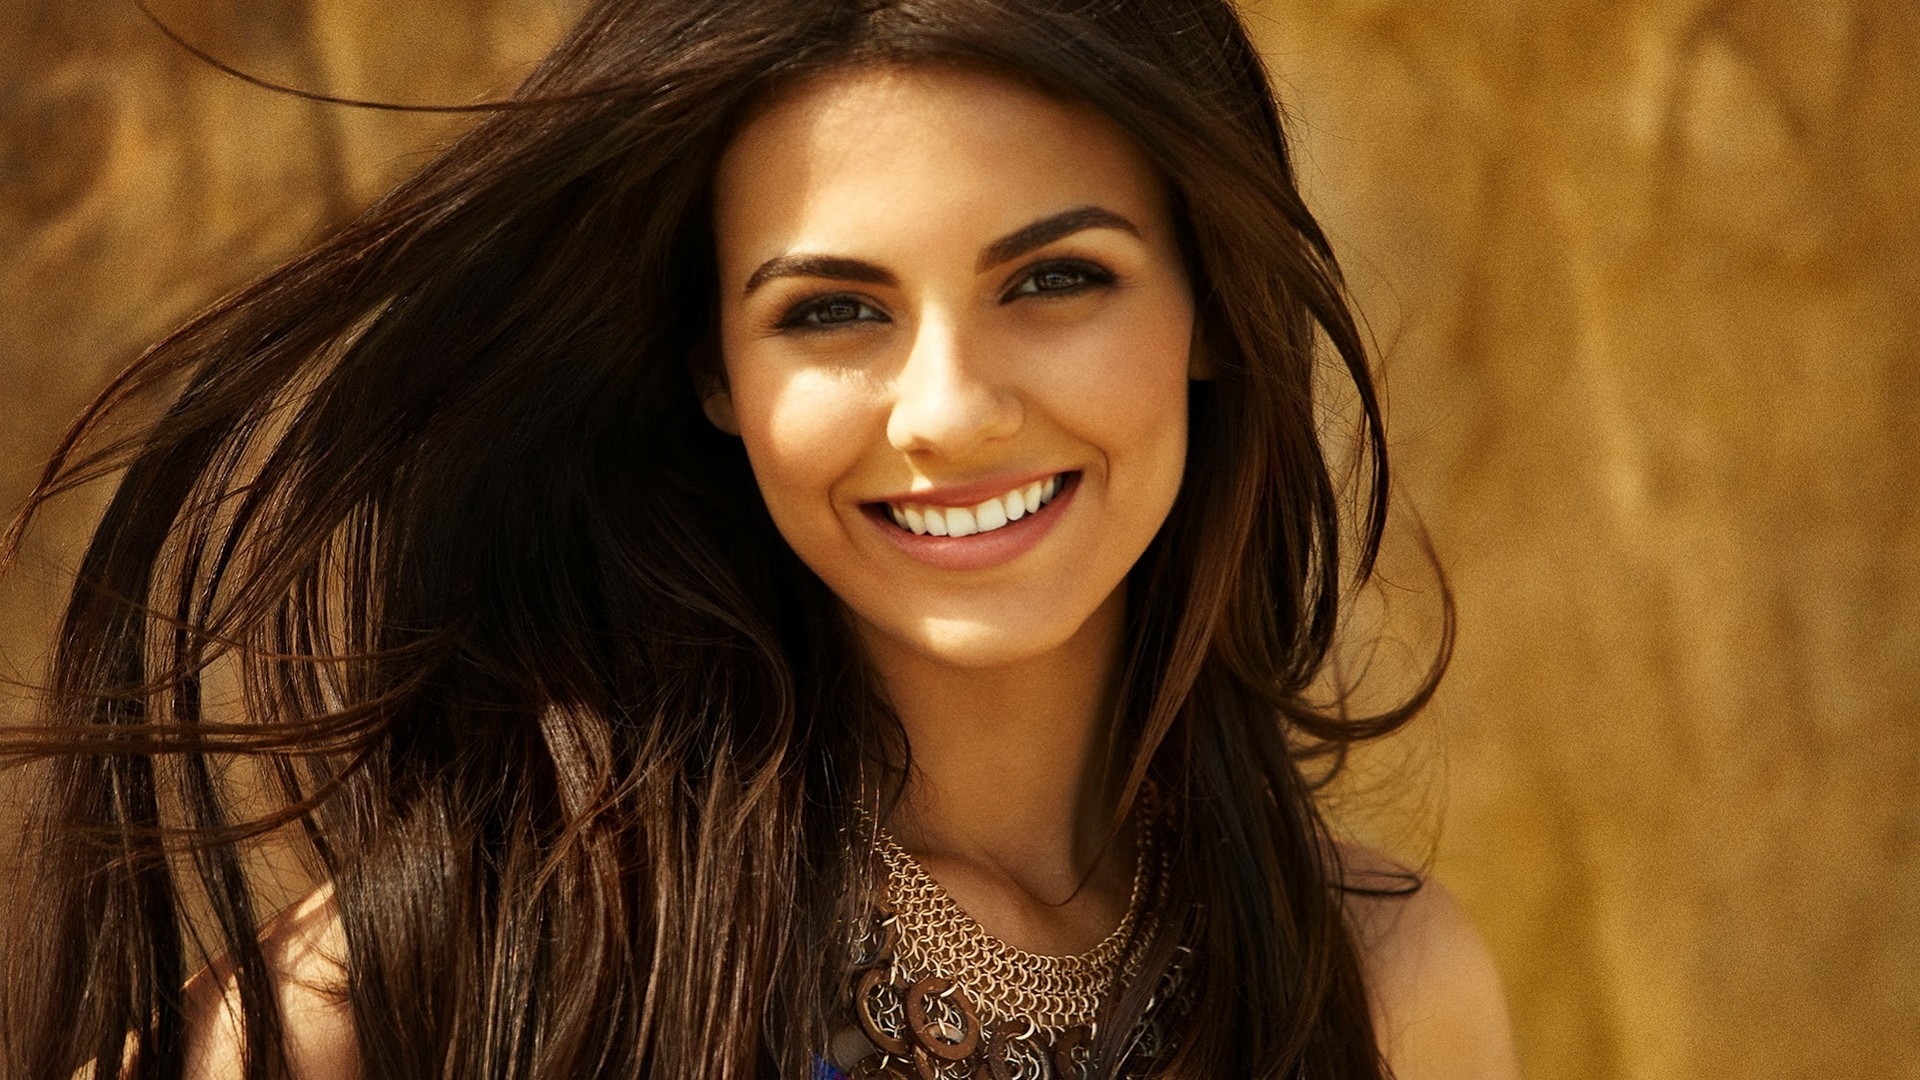 Cute Smile of Victoria Justice for 1920 x 1080 HDTV 1080p resolution